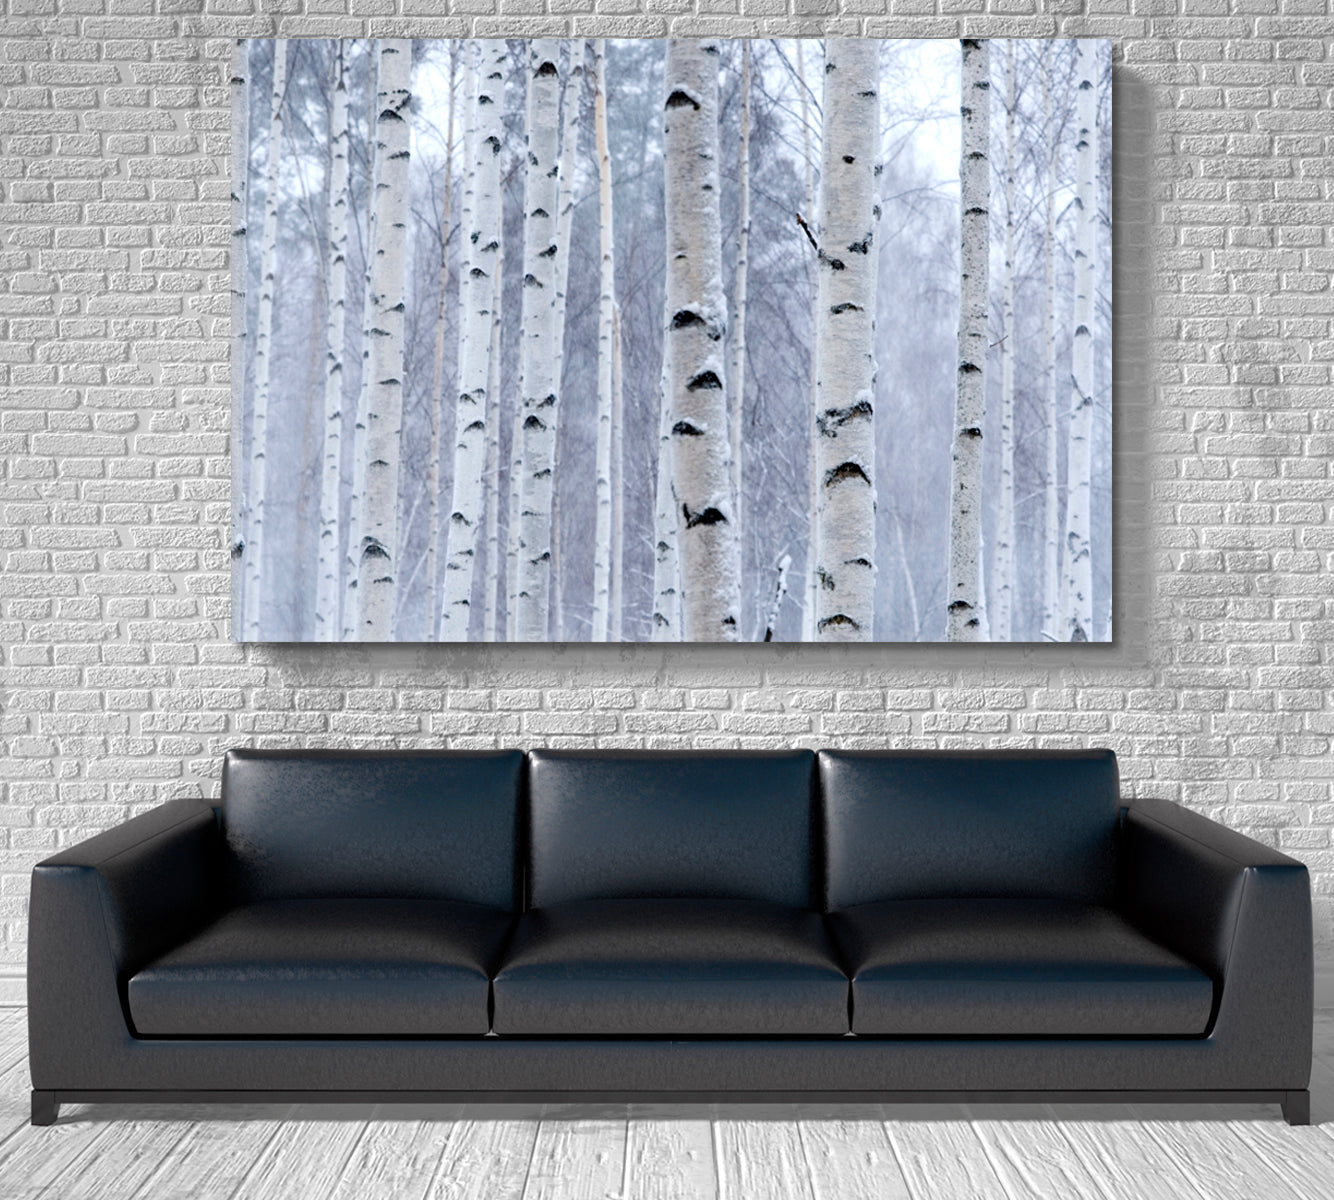 Birch Trees Forest Nature Wall Canvas Print Artesty 1 panel 24" x 16" 